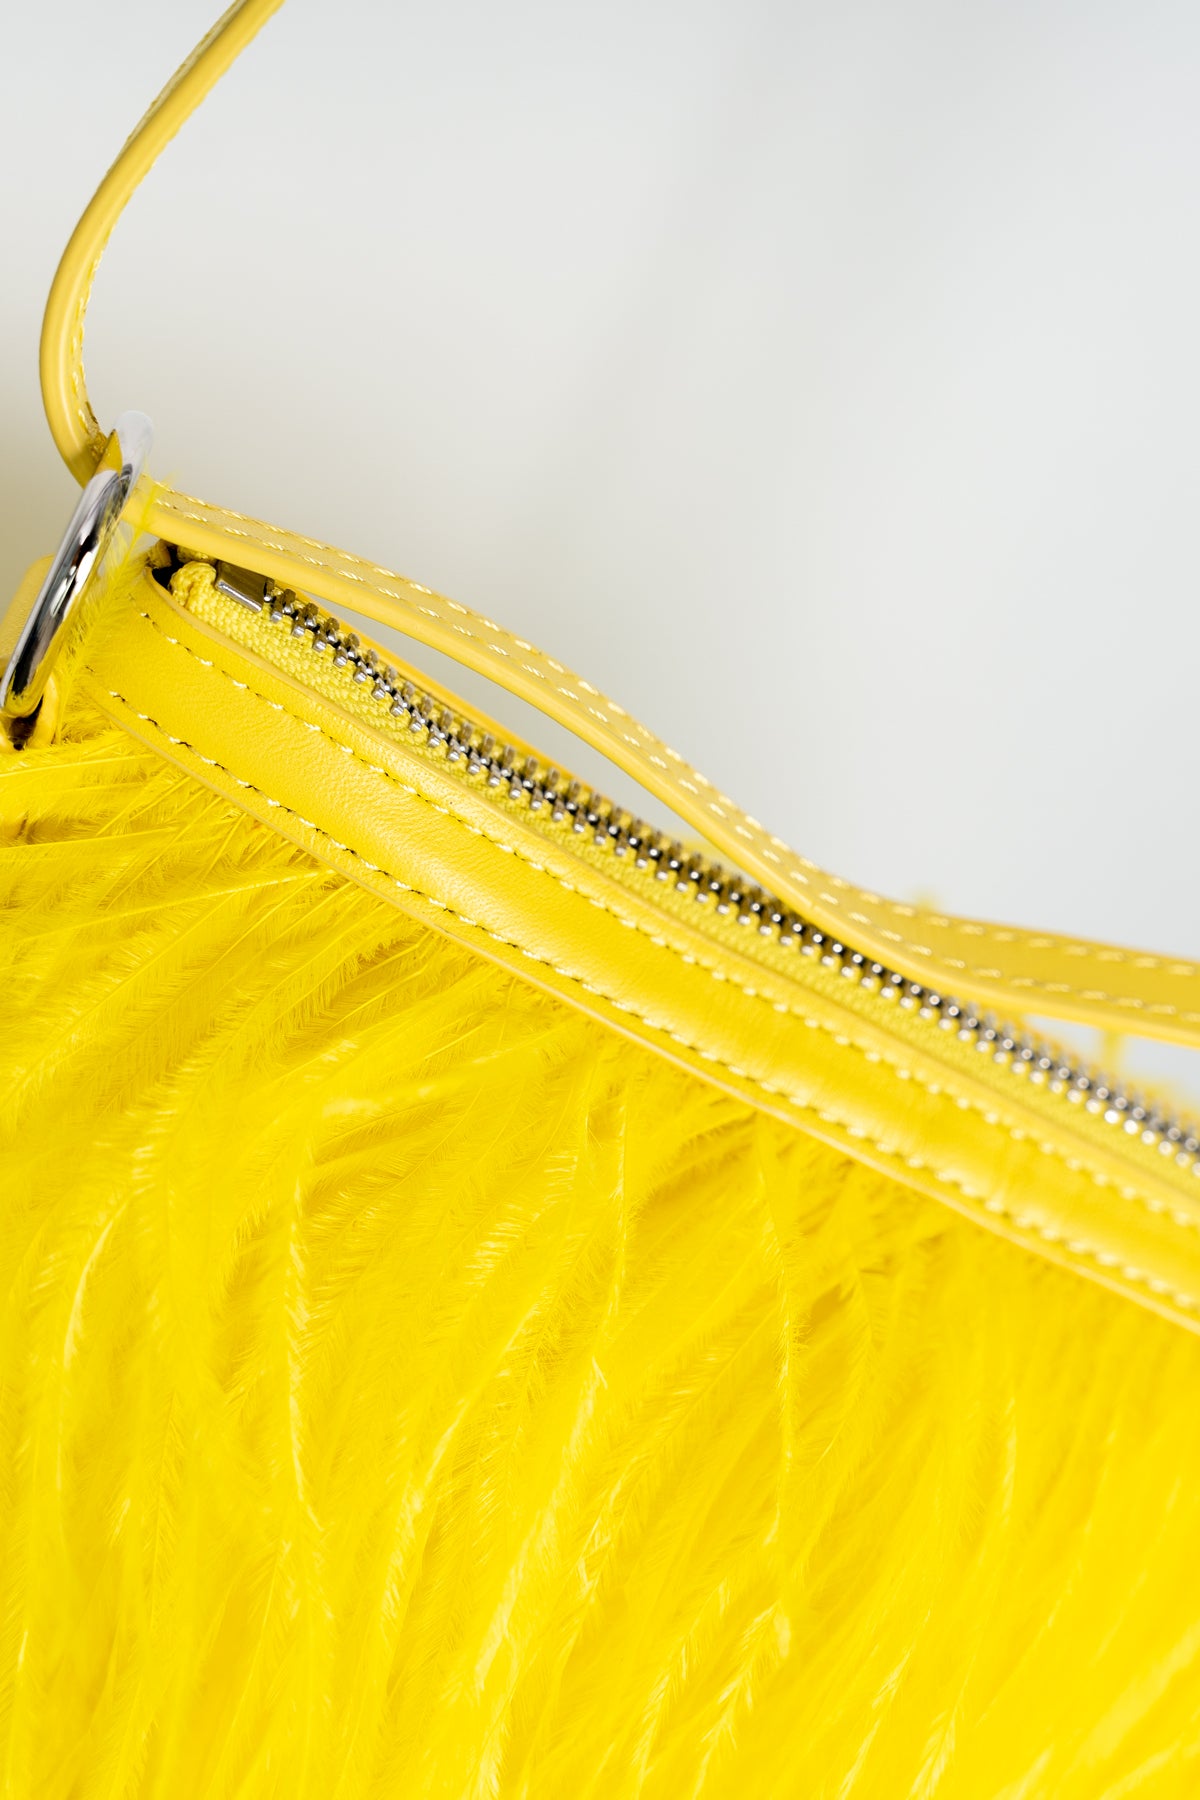 YELLOW FEATHER BAG